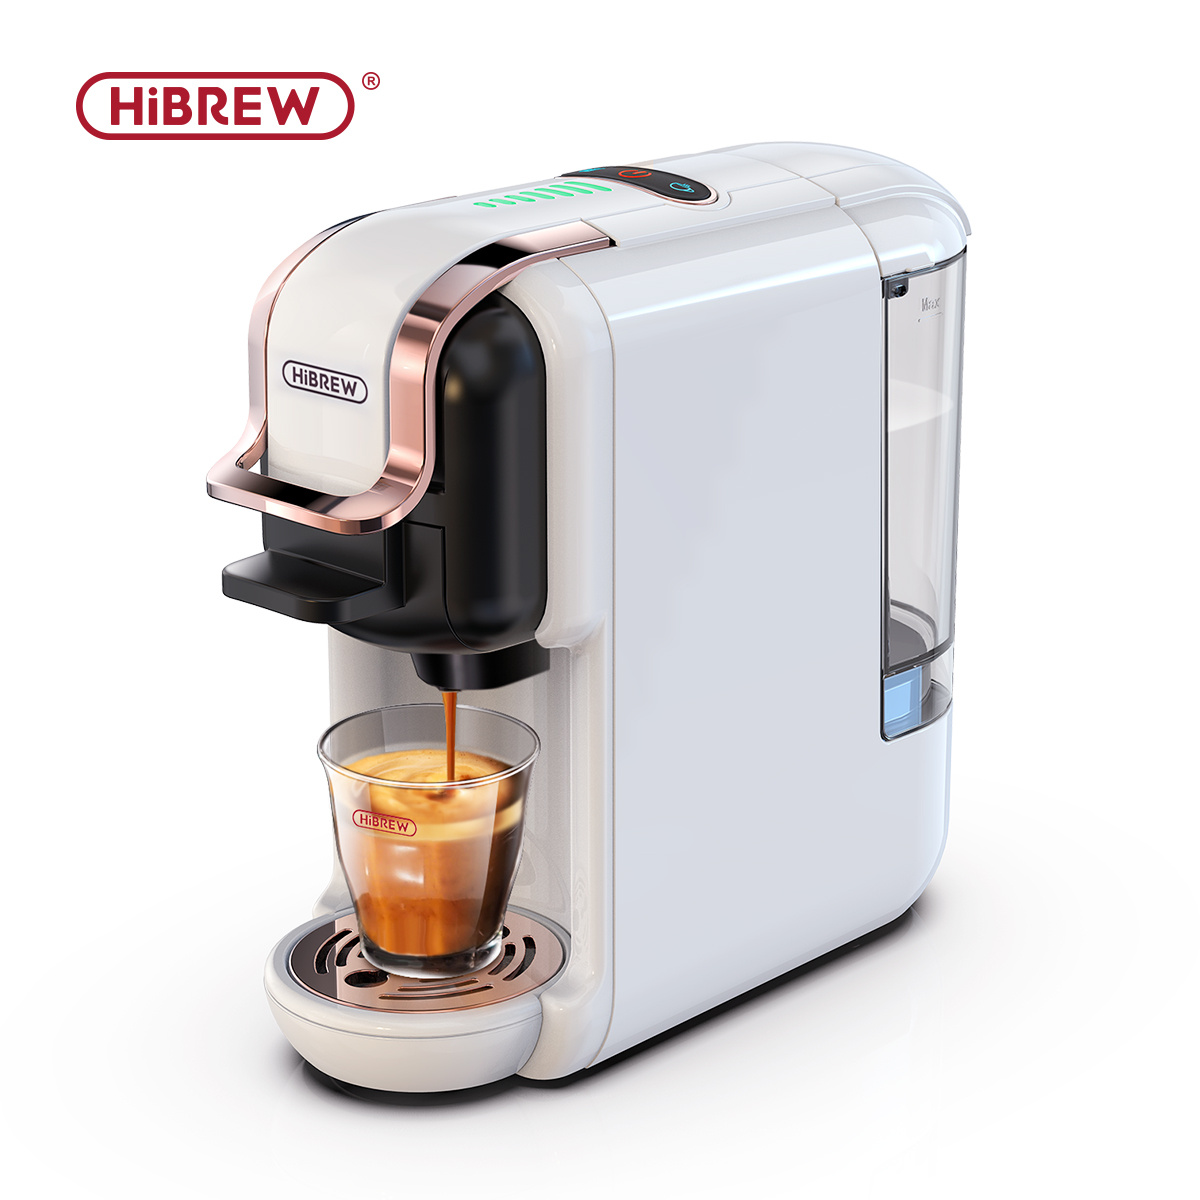 19Bar 5-in-1 Coffee Machine: Enjoy Hot/Cold Dolce Gusto Milk, Nespresso  Capsules, ESE Pods & Ground Coffee!